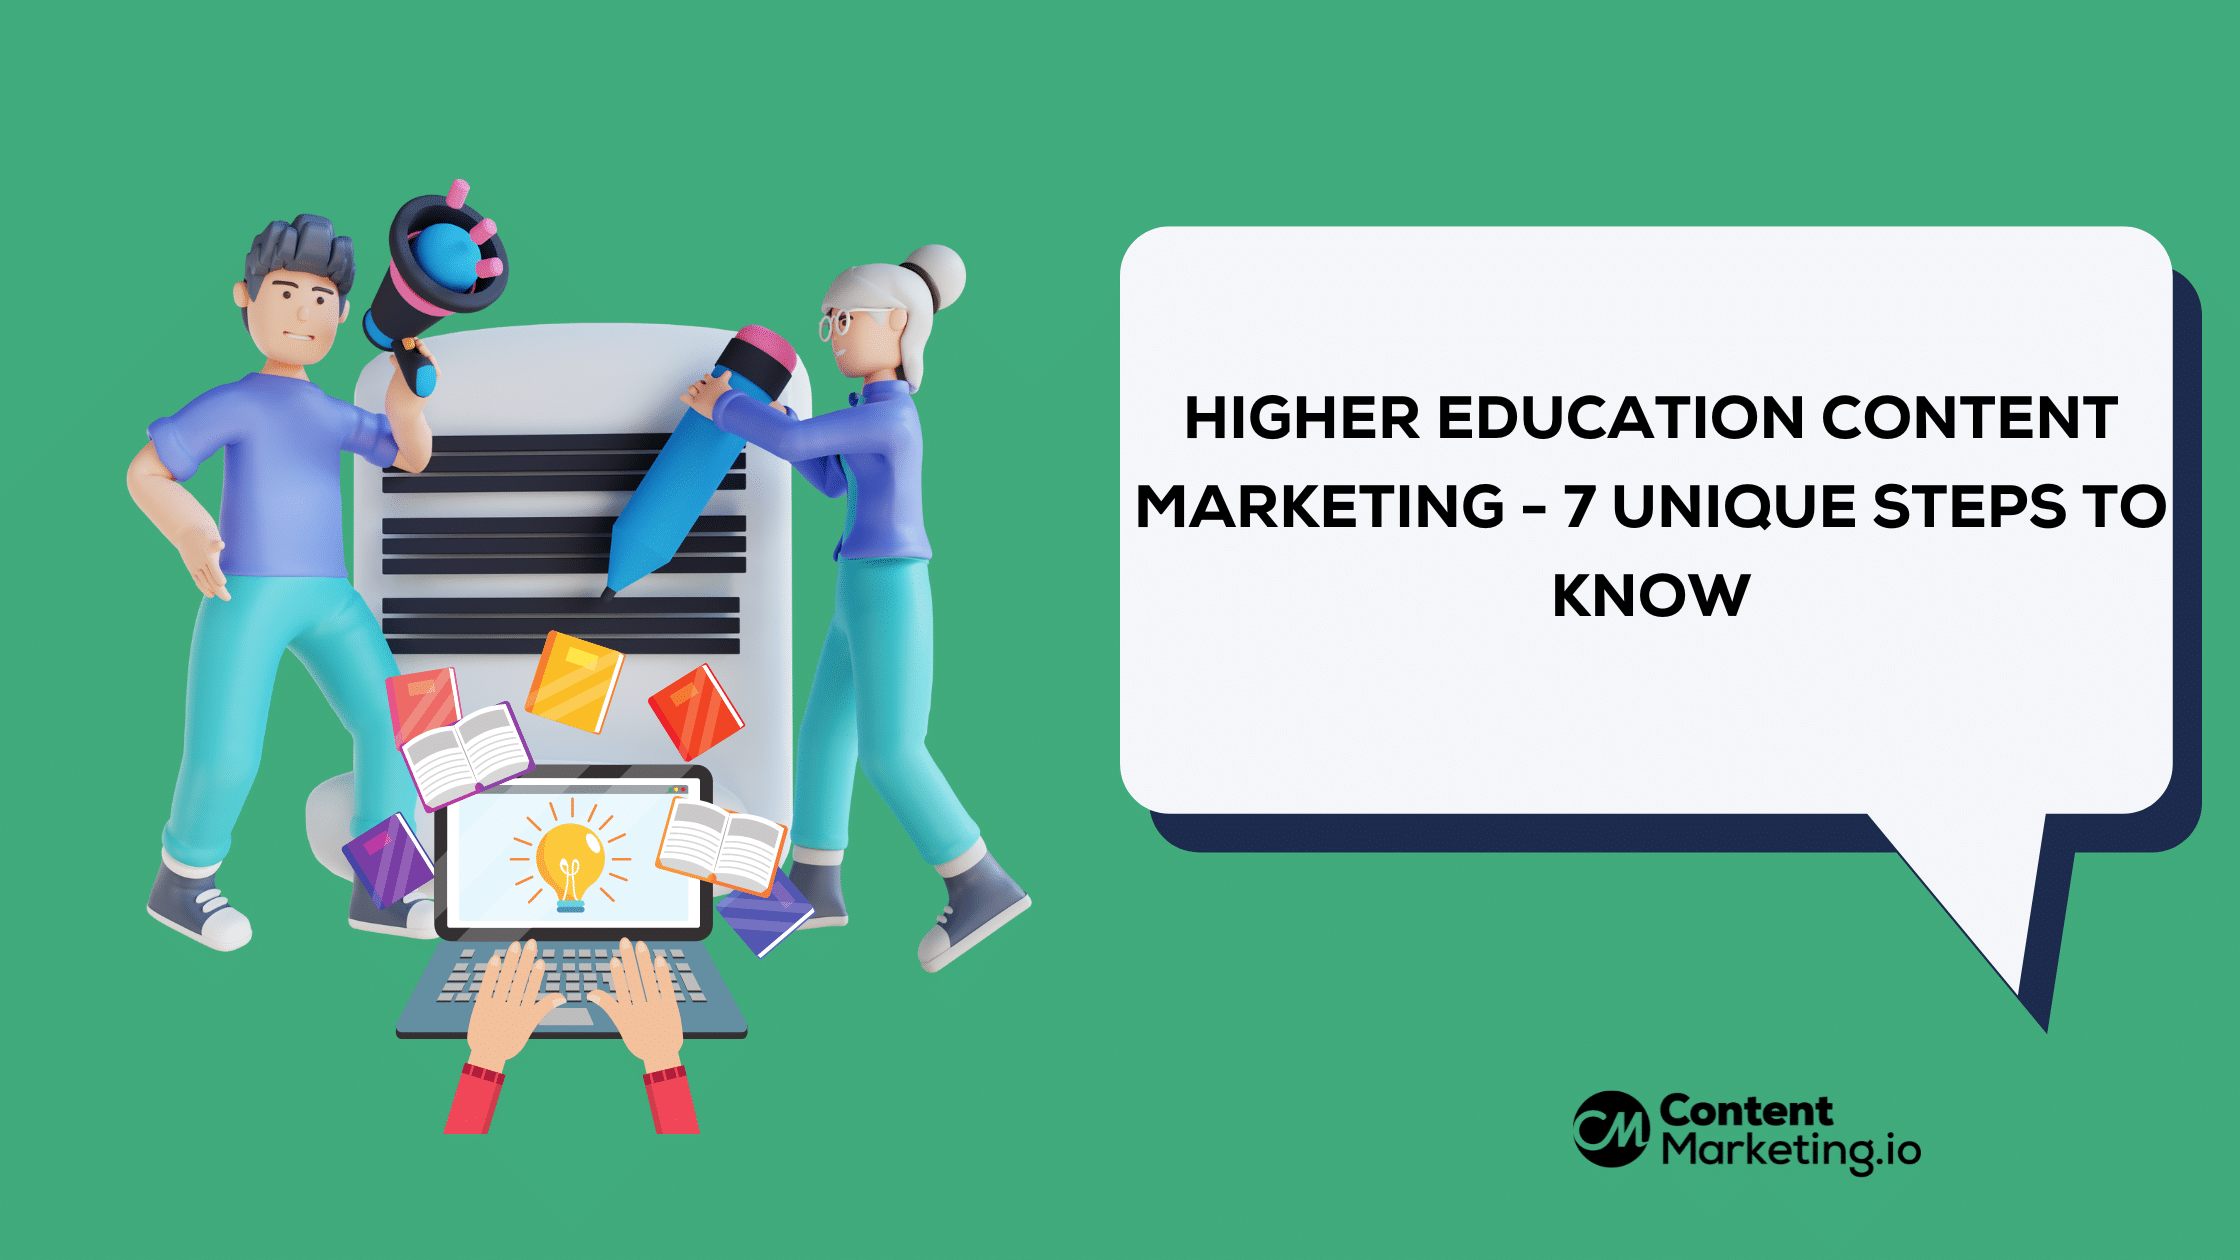 Higher Education Content Marketing - 7 Unique Steps To Know